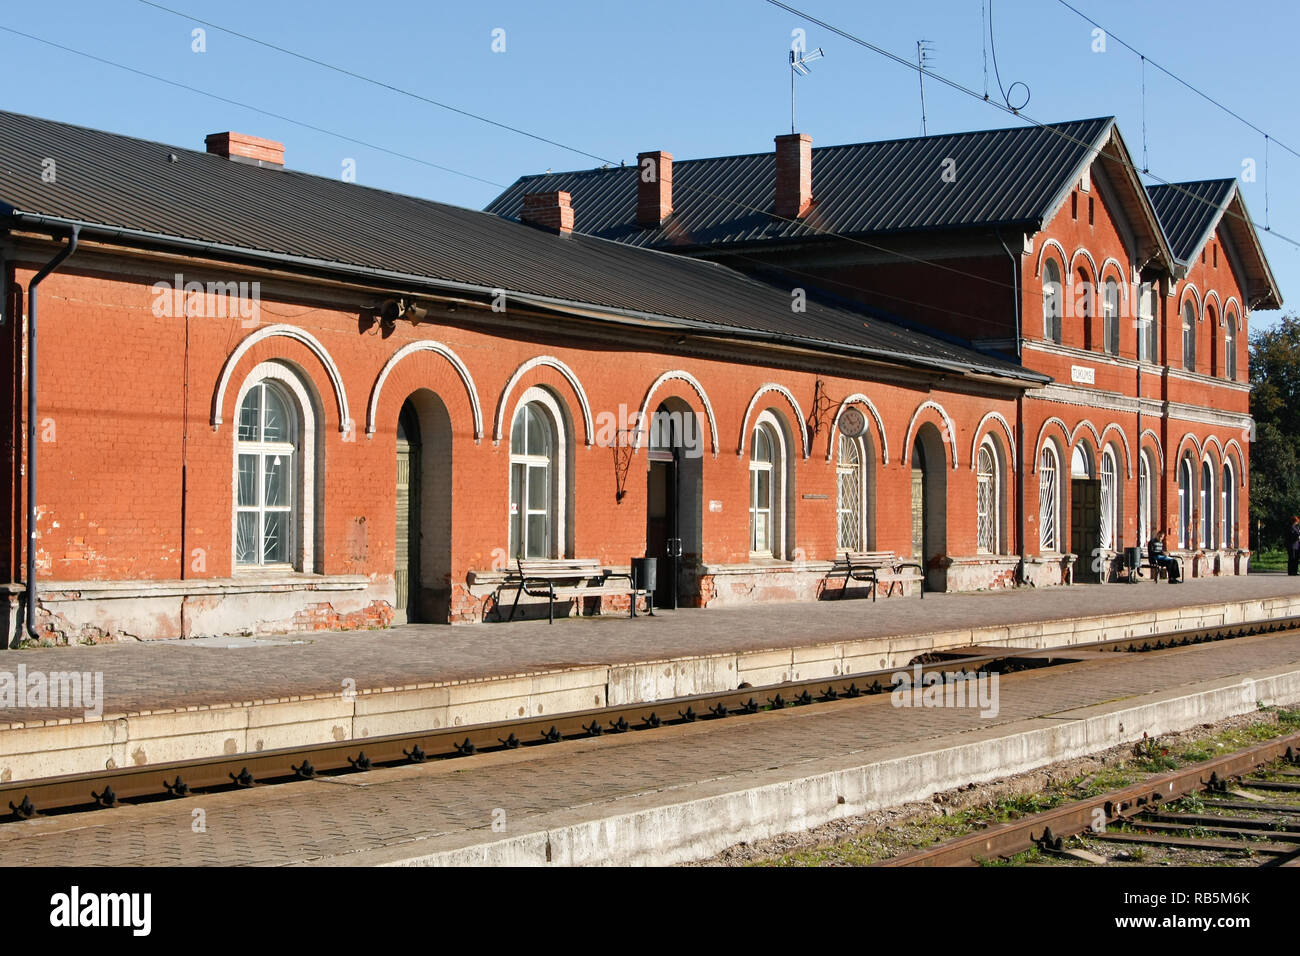 Beautiful view of old railway station. Stock Photo